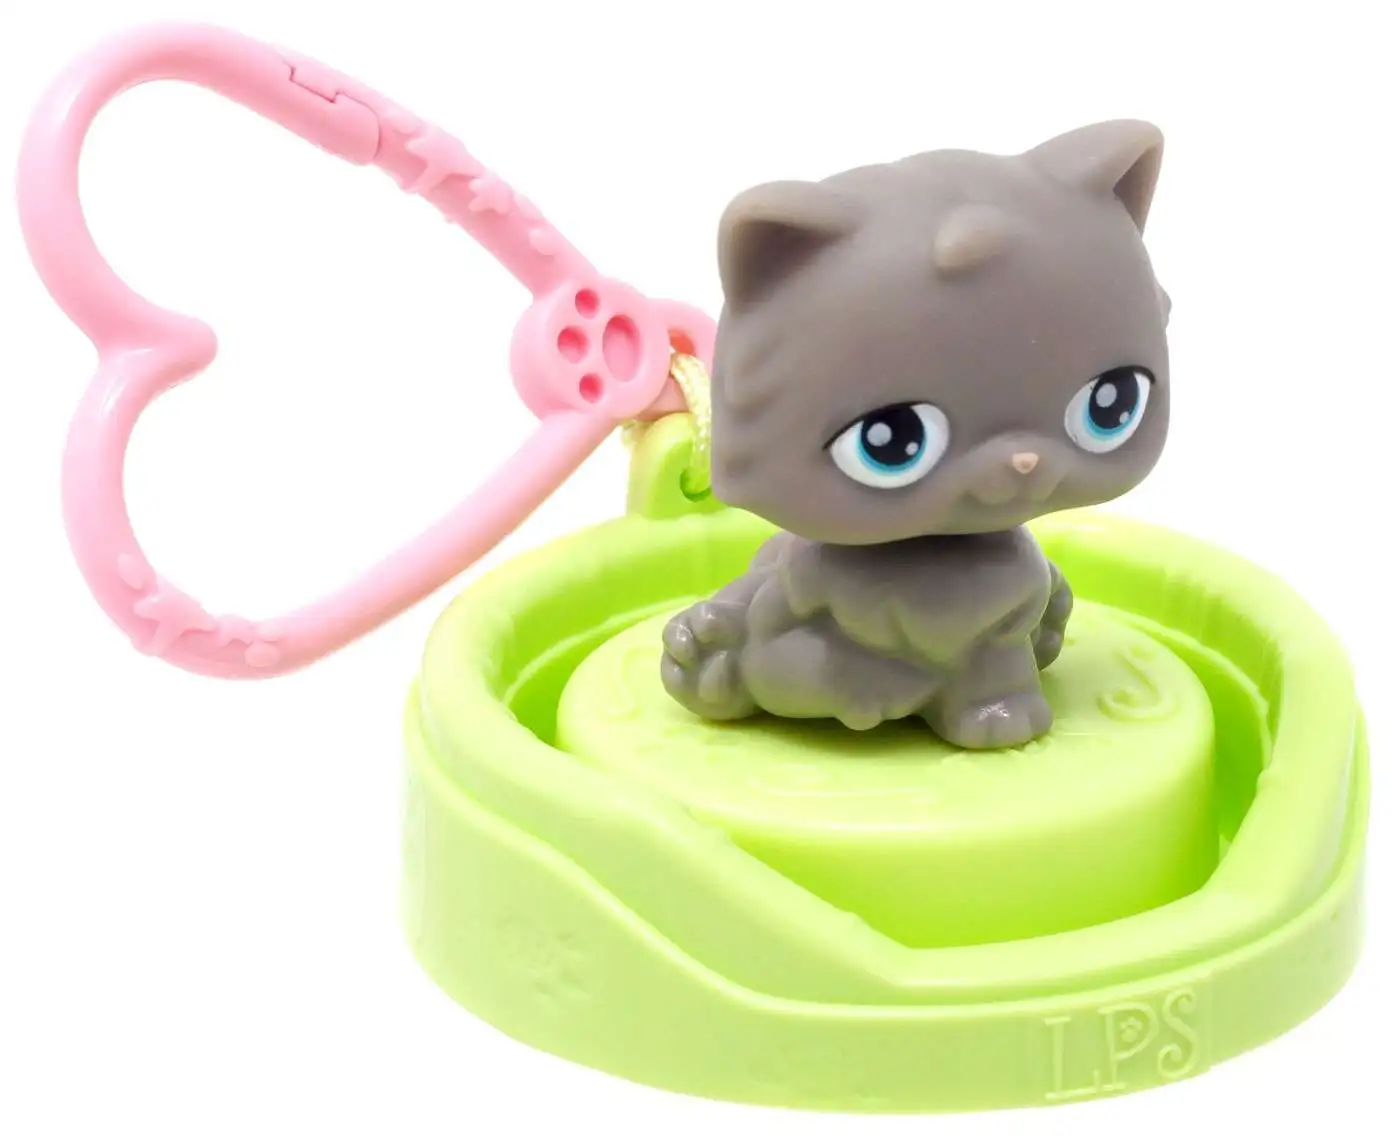 LPS COLLECTION Action Figure COMIC MASK CAT KITTY TOY 2" LITTLEST PET SHOP 